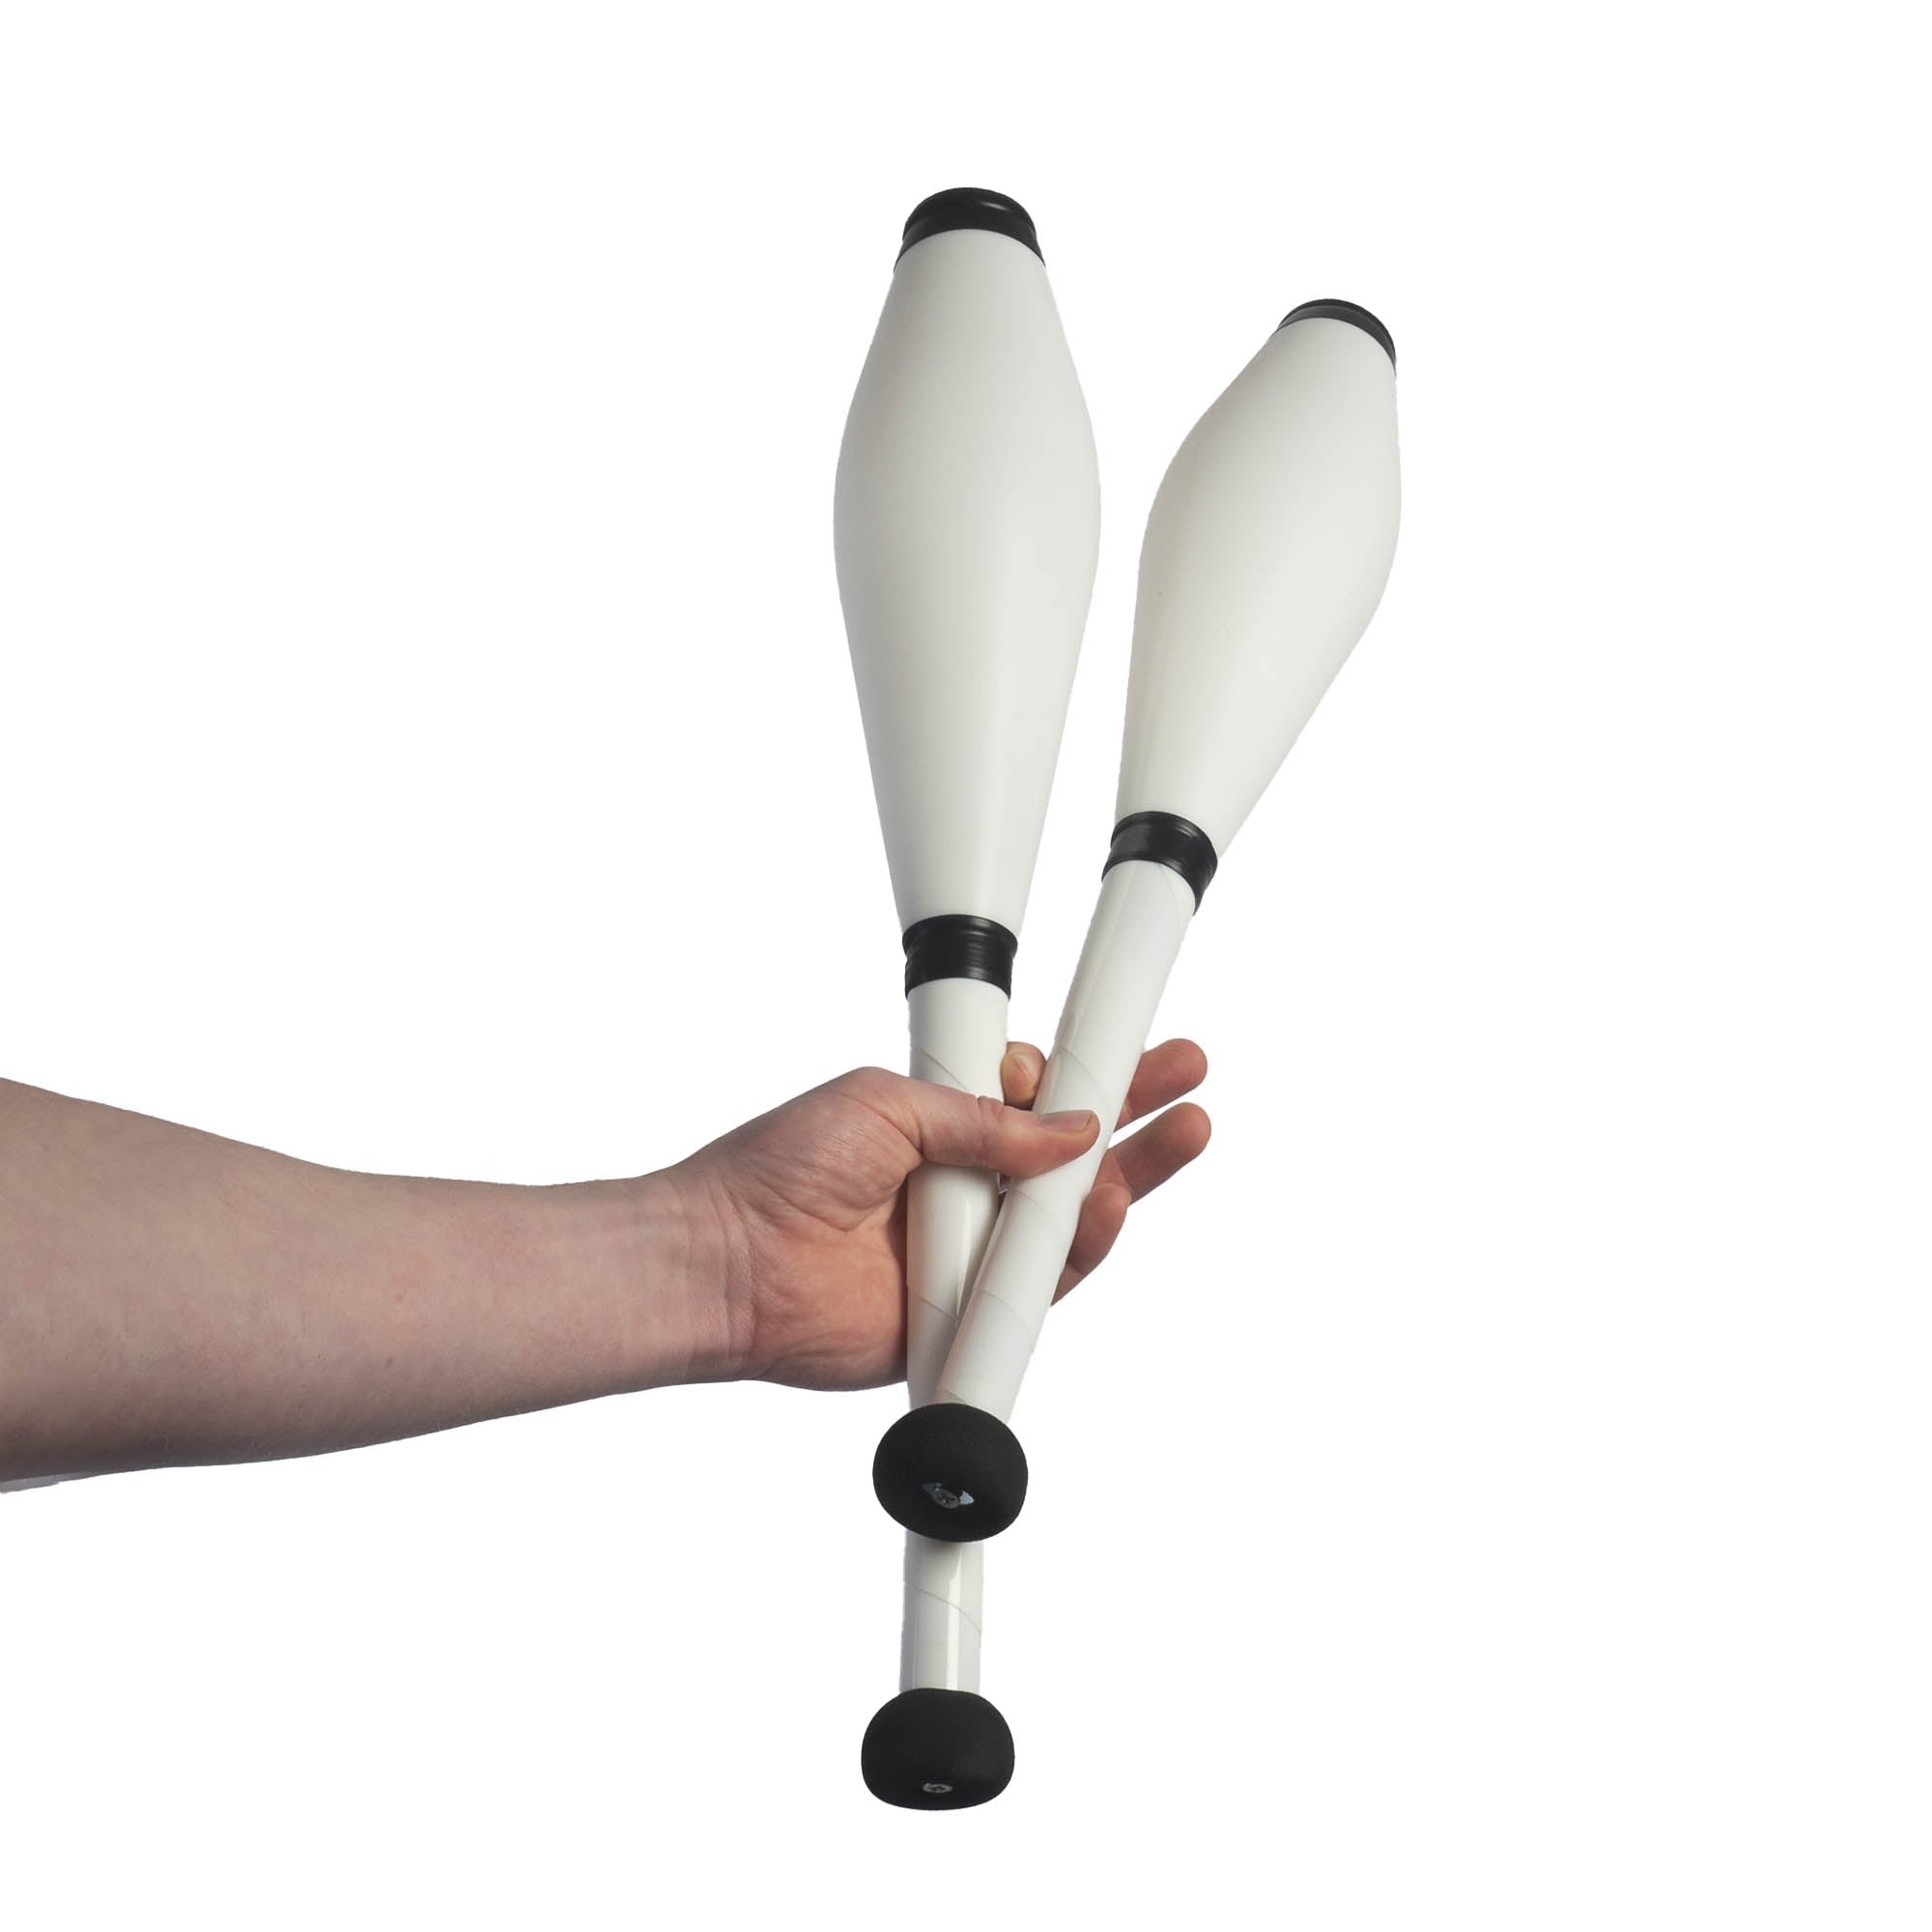 Two kosmos juggling clubs in hand unlit